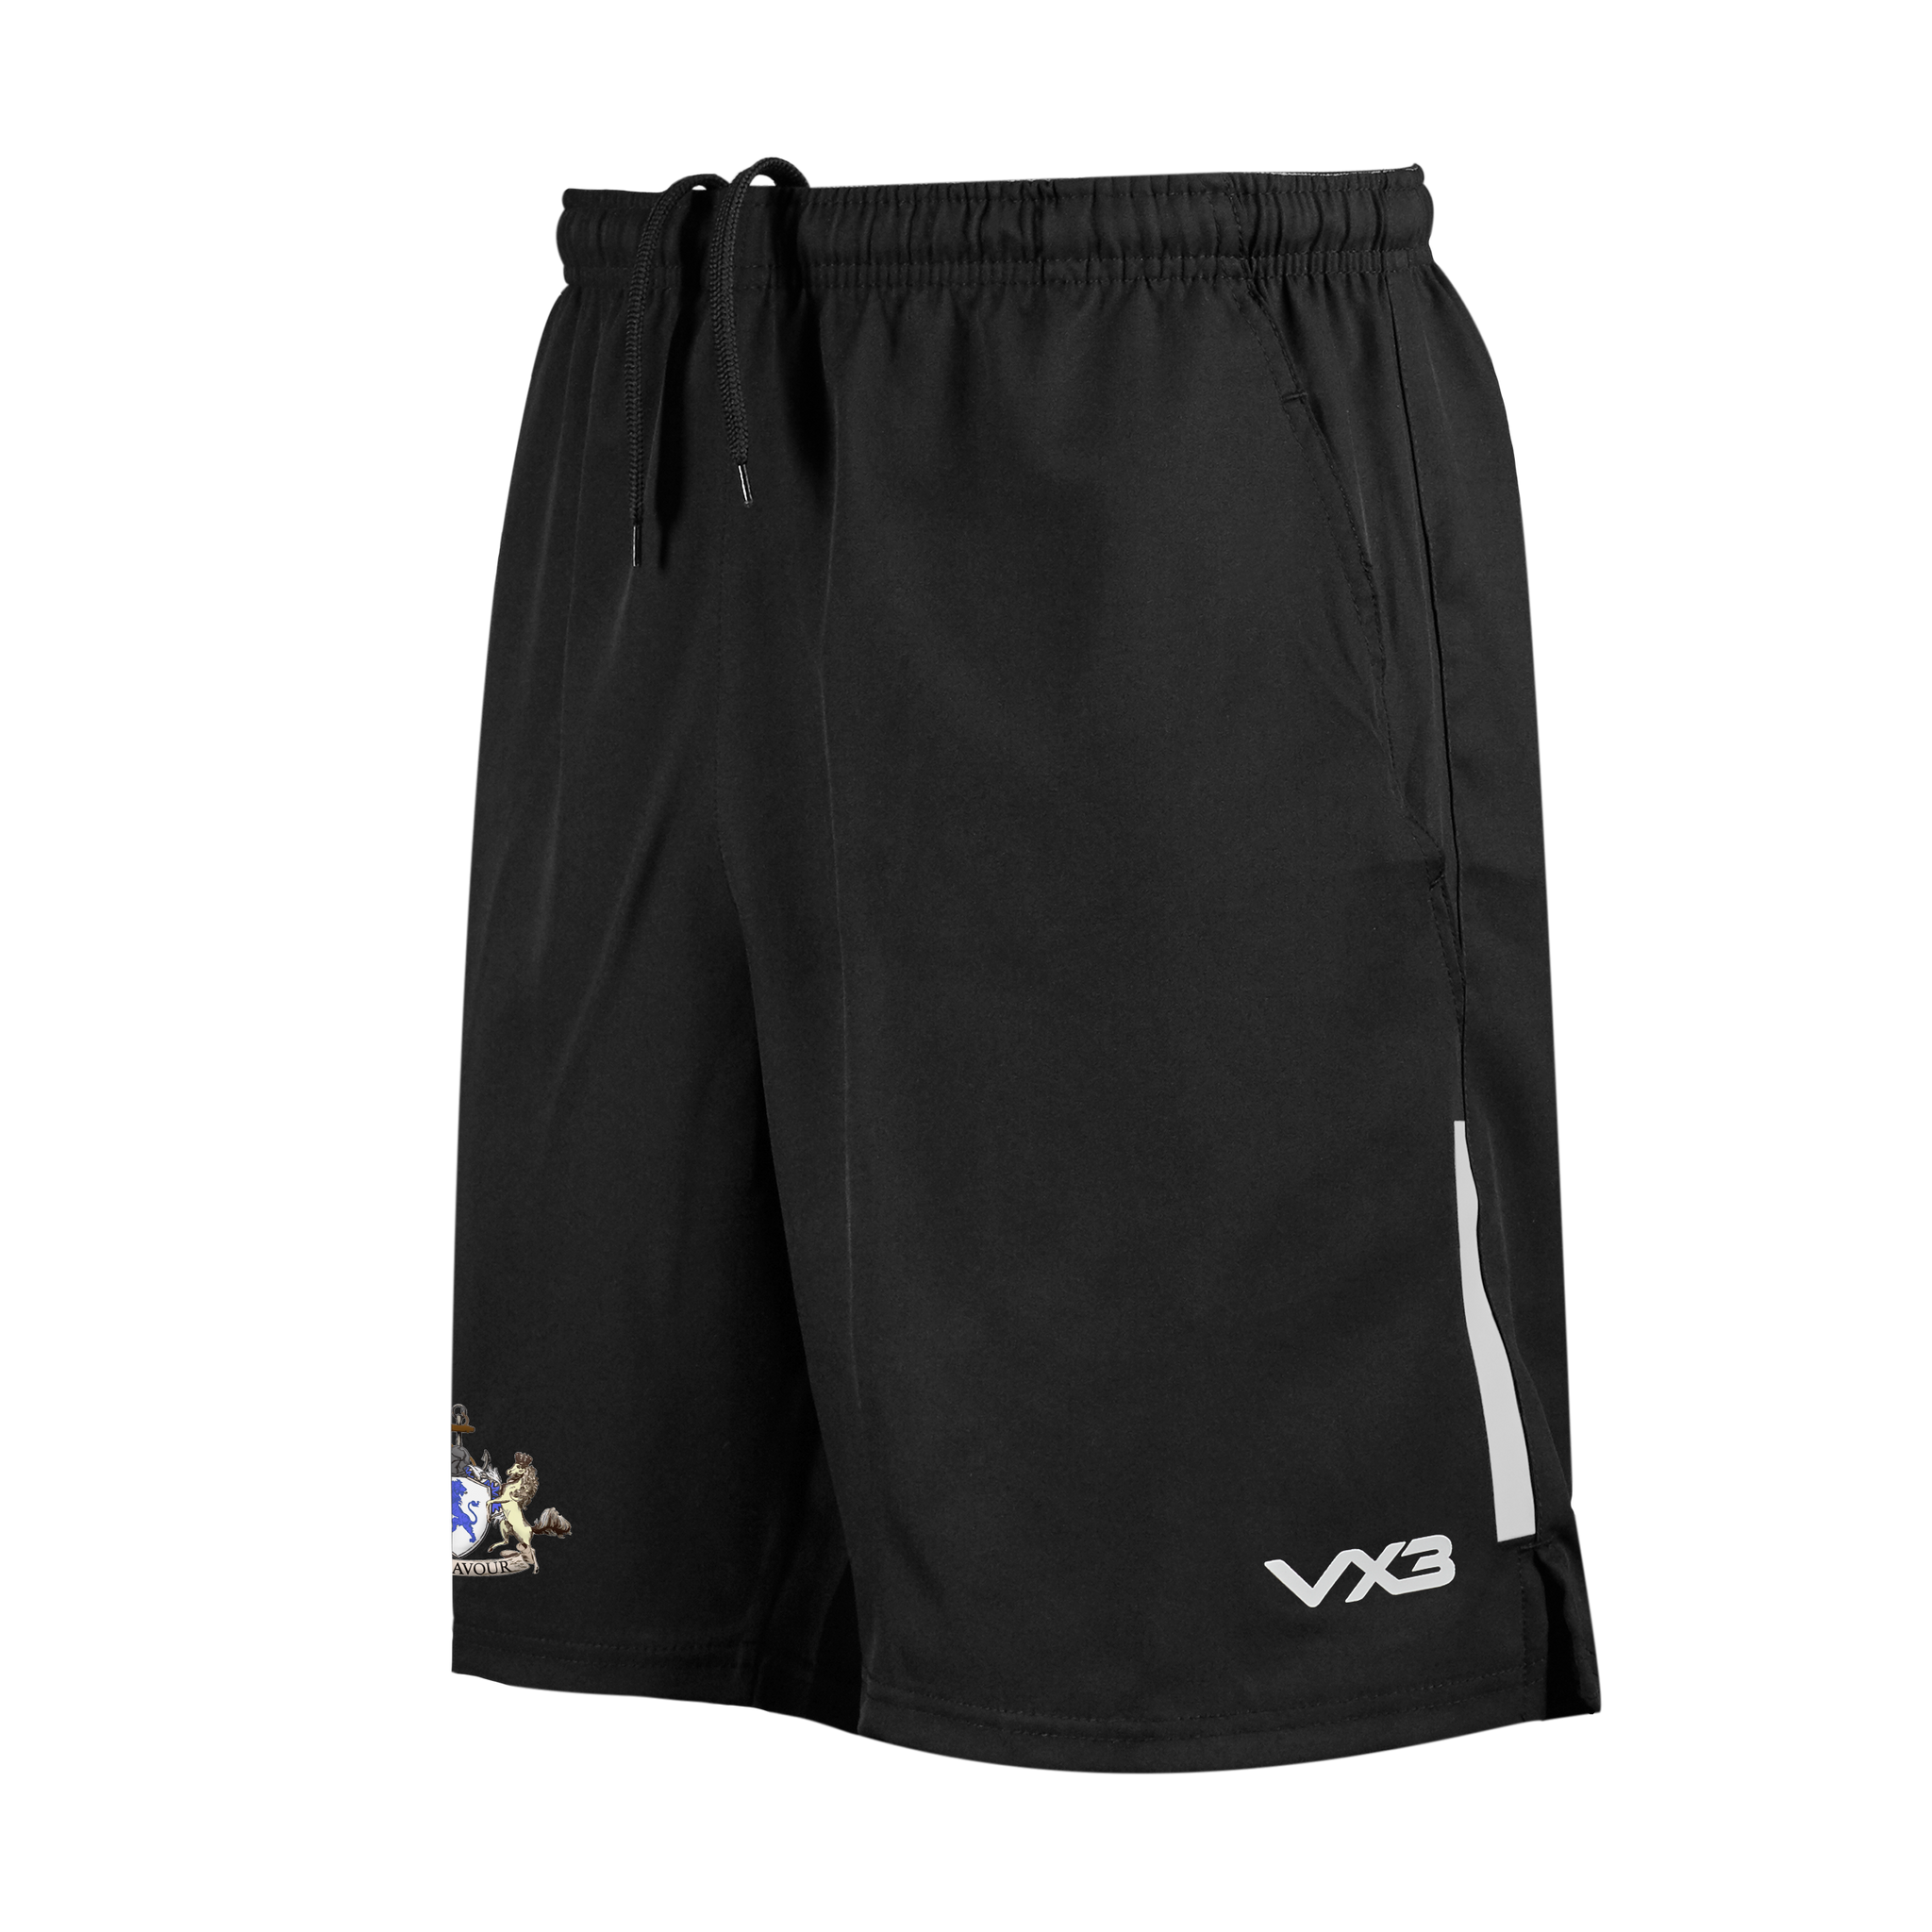 Cleveland Cougars 7s Fortis Travel Shorts